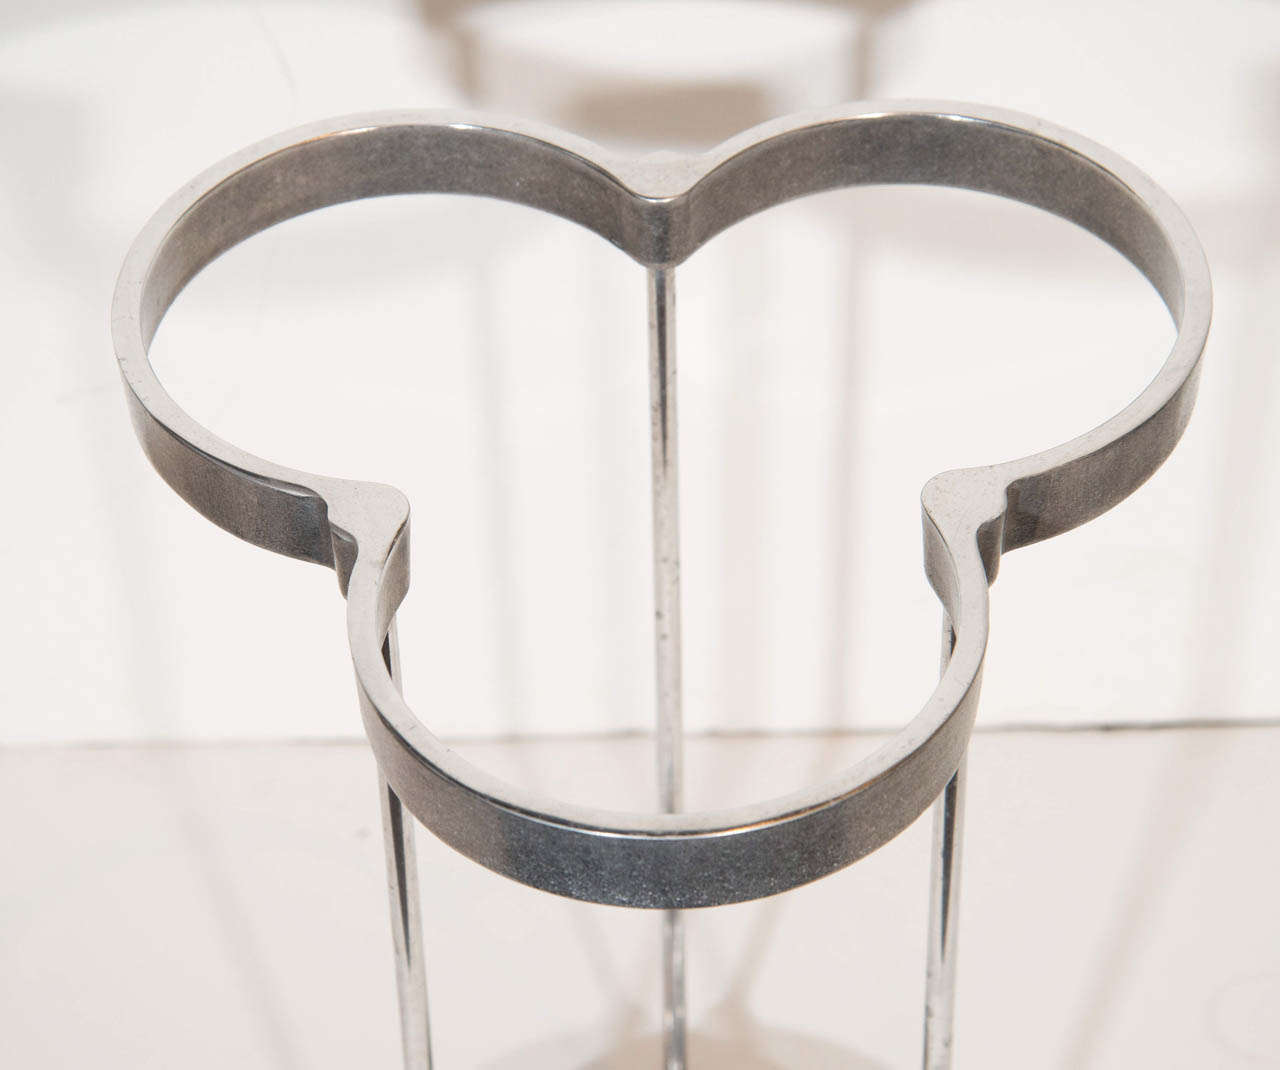 20th Century Modernist Umbrella Stand with Ivy Design by Emanuela Frattini Magnusson